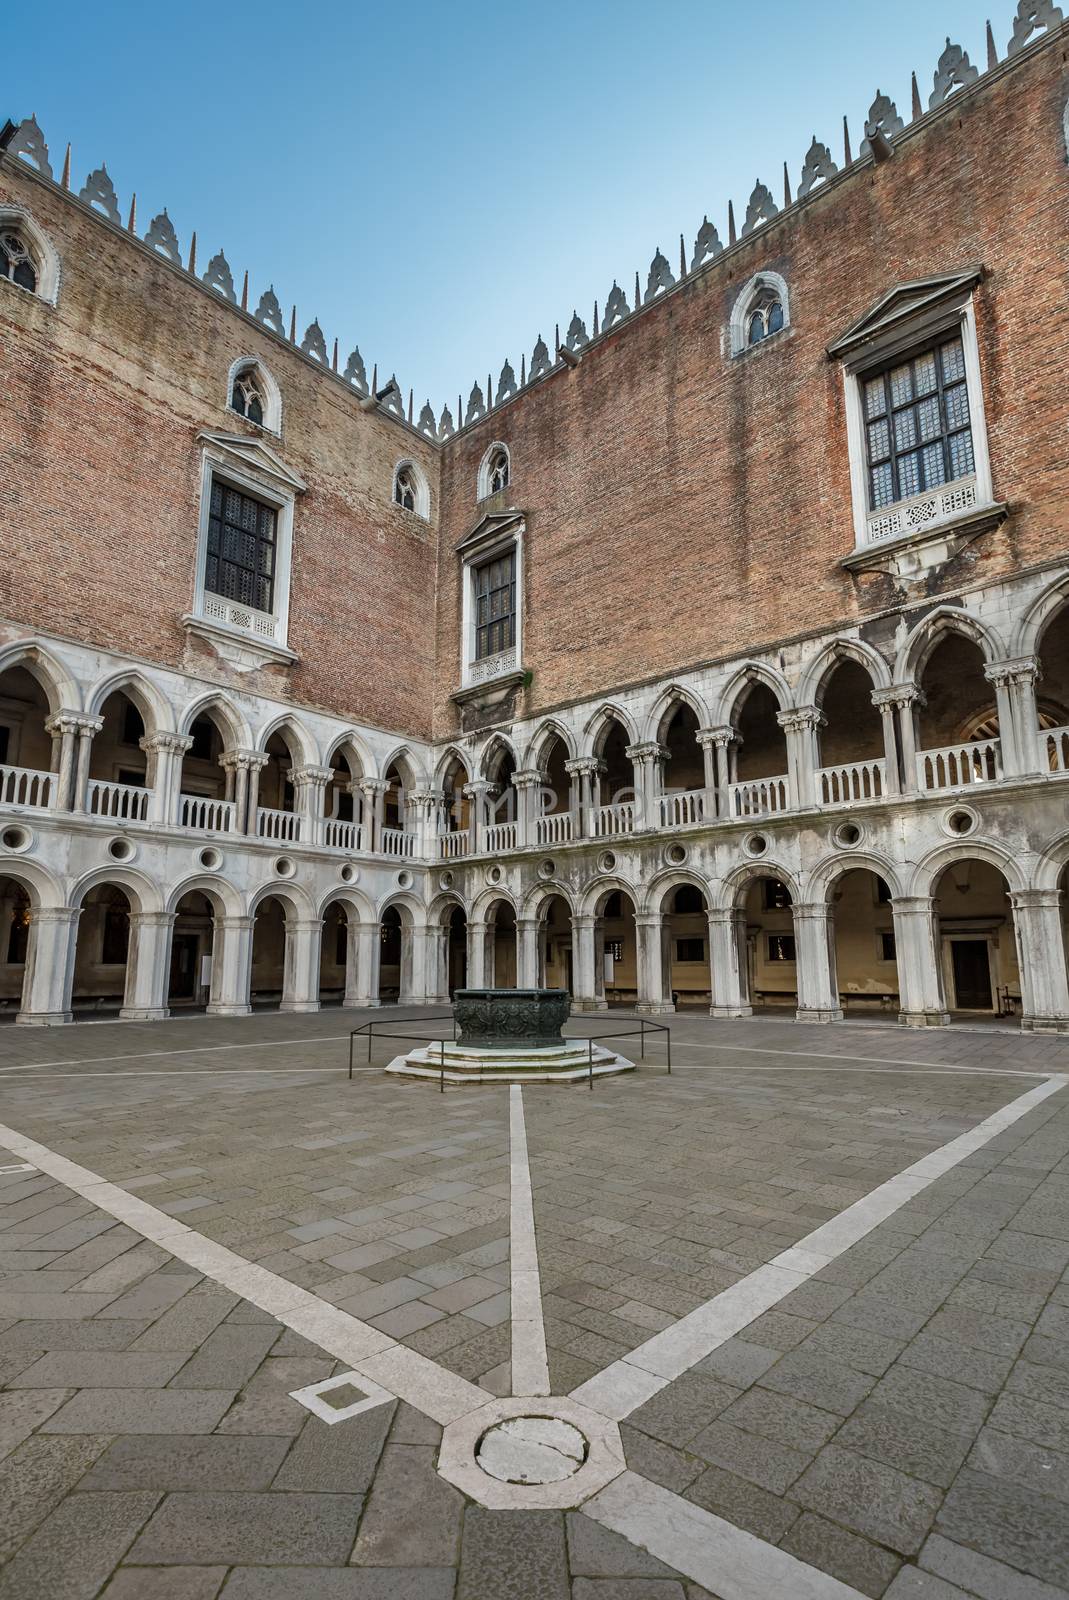 Internal Yard of Doge's Palace (Palazzo Ducale) in Venice, Italy by anshar